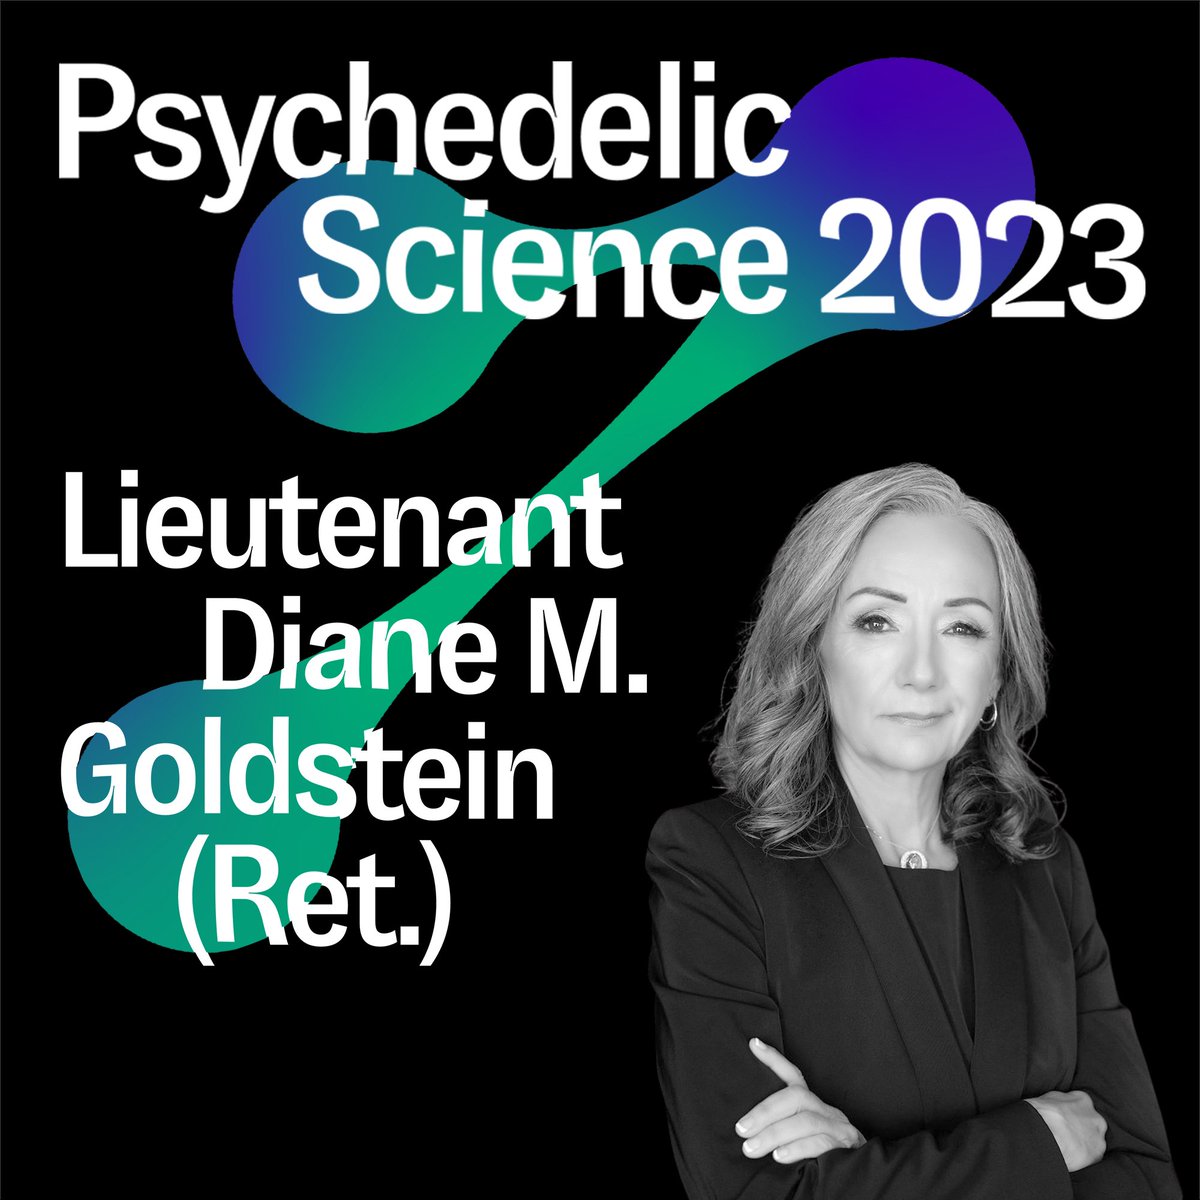 We are thrilled to announce our newly confirmed speakers including:

🤩 @MichaelPollan, of @SciPsychedelics
🤩 @IamJohnMackey, Former CEO of @WholeFoods
🤩 @SashaCohenNYC, Olympian
🤩 Lieutenant @DianeMGoldstein (Ret.), of @PoliceForReform

Be part of the breakthrough. #PS2023